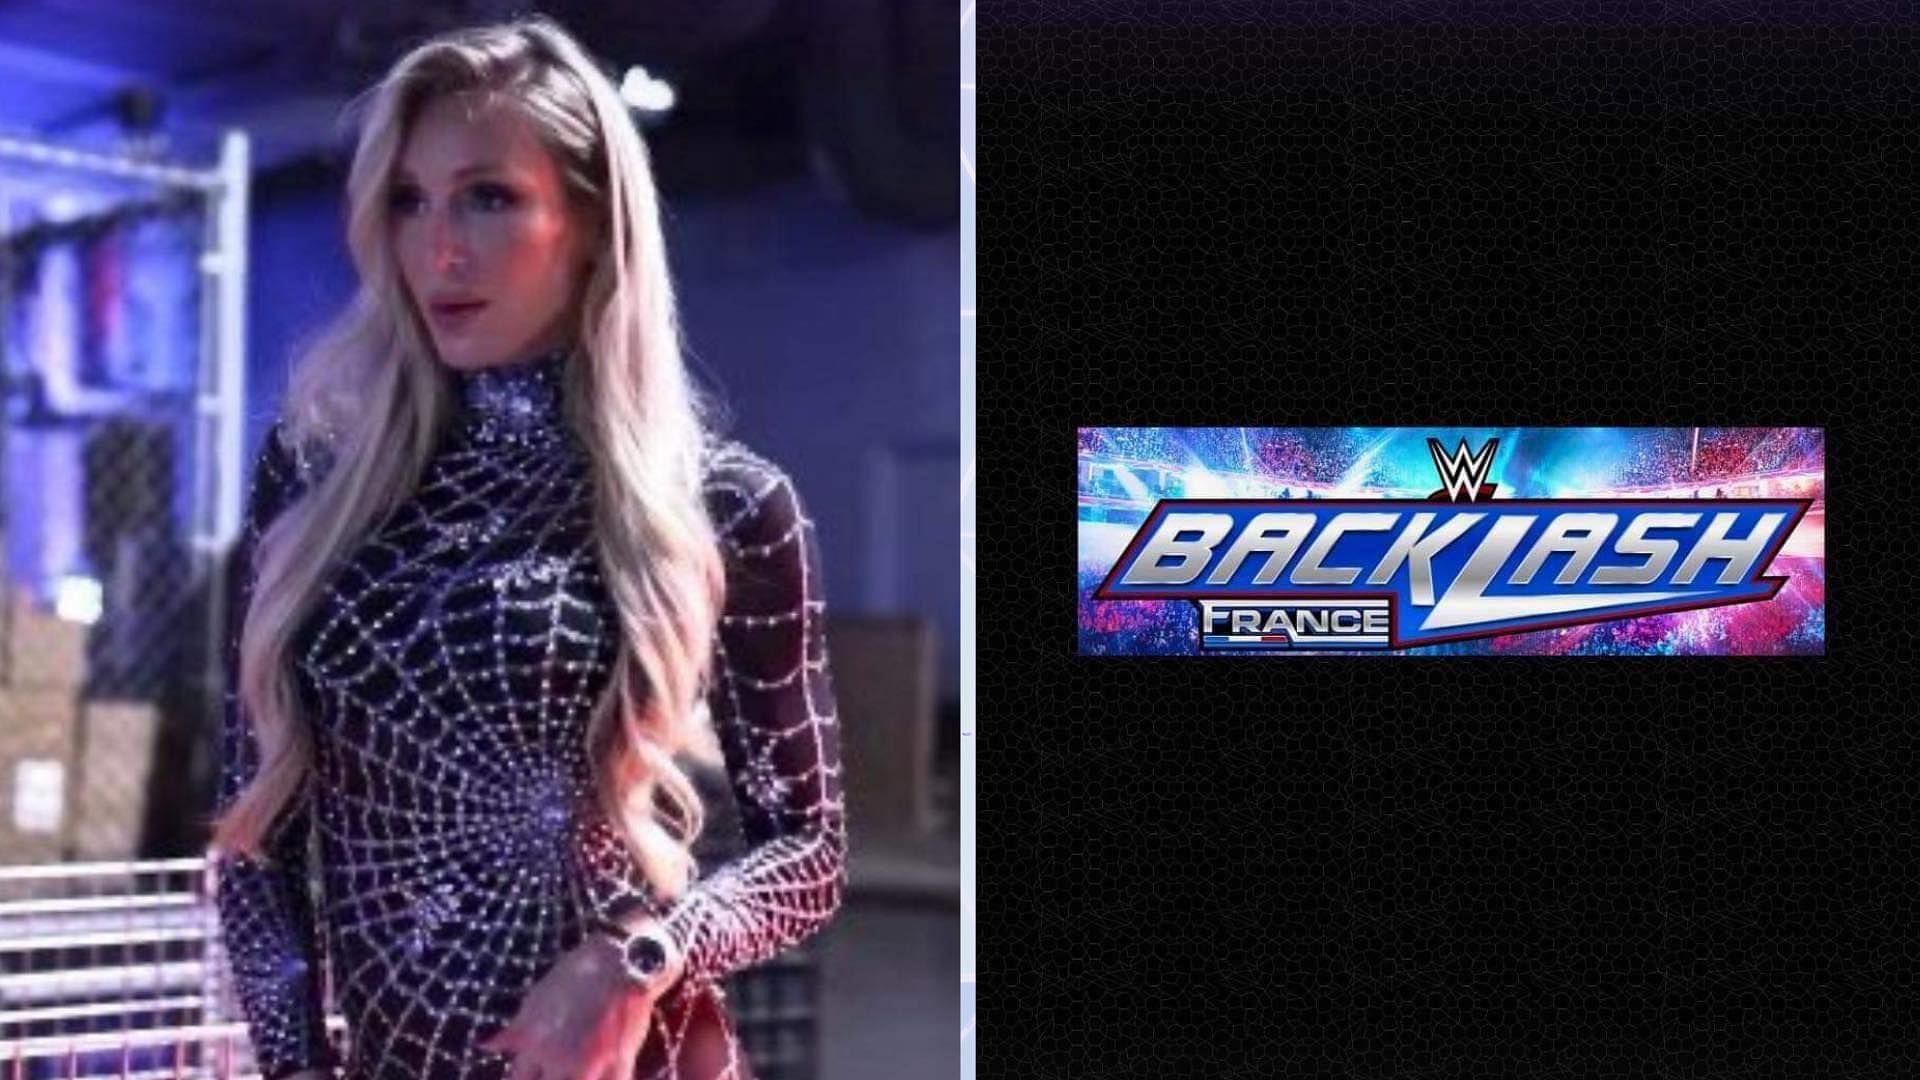 Will Charlotte Flair make an appearance at WWE Backlash France?